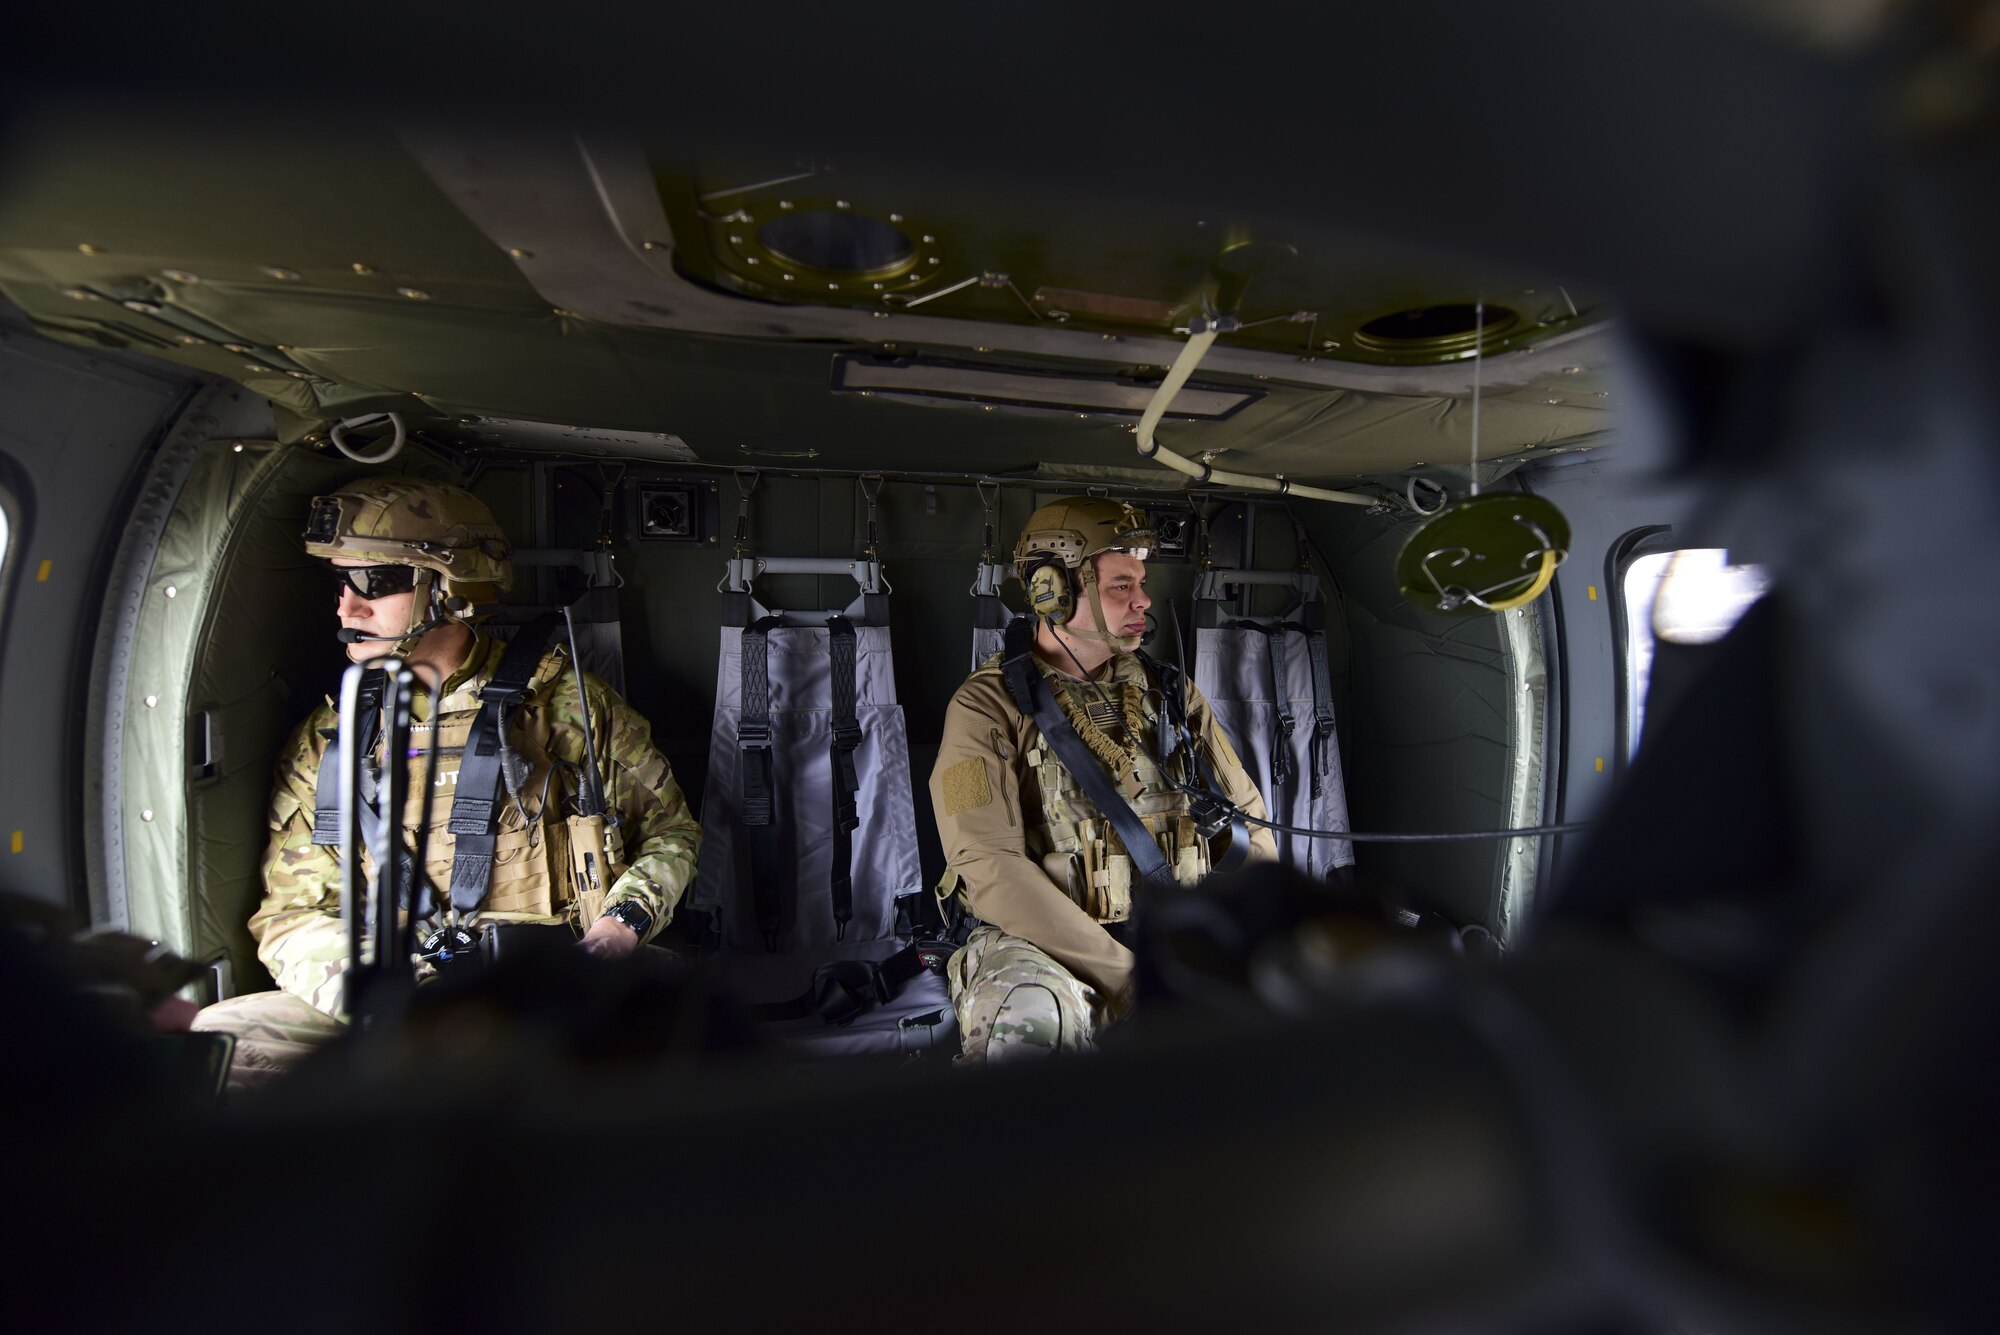 Joint Terminal Attack Controllers ride in a UH-0 Black Hawk during a joint training at Warsaw, Mo., Jan. 31, 2018. The training, titled Truman Relief, gave Whiteman Air Force Base, Mo., units the opportunity to go through scenarios involving JTACs capabilities. (U.S. Air Force by Staff Sgt. Danielle Quilla)